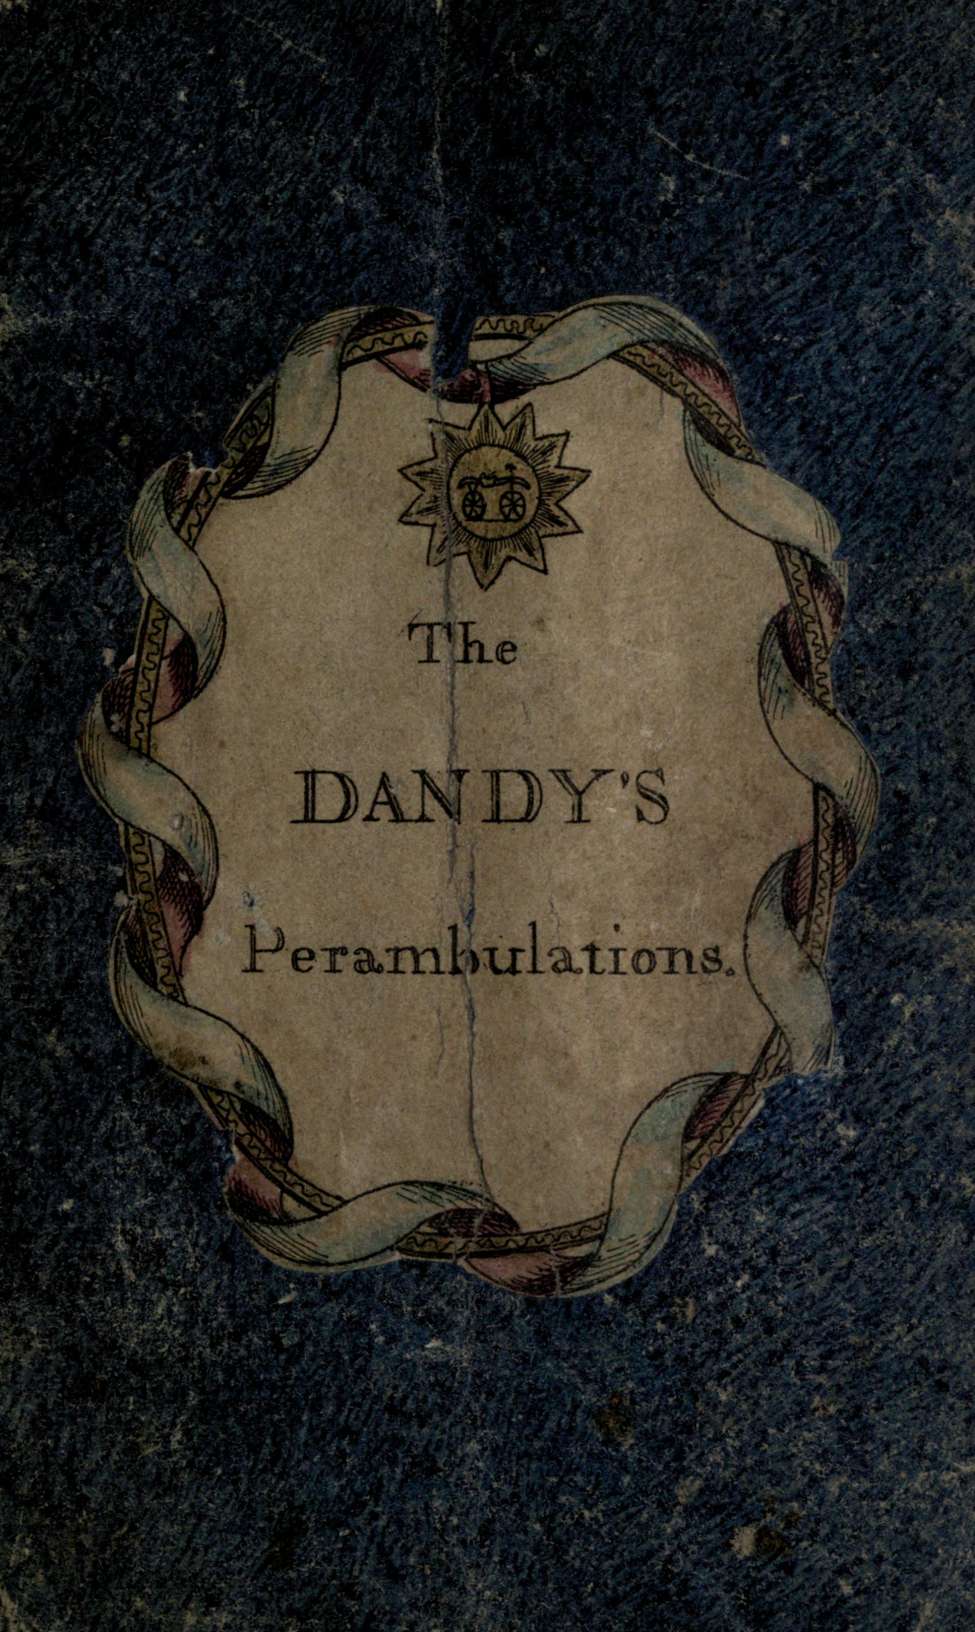 Comic Book Cover For The Dandy's Perambulations